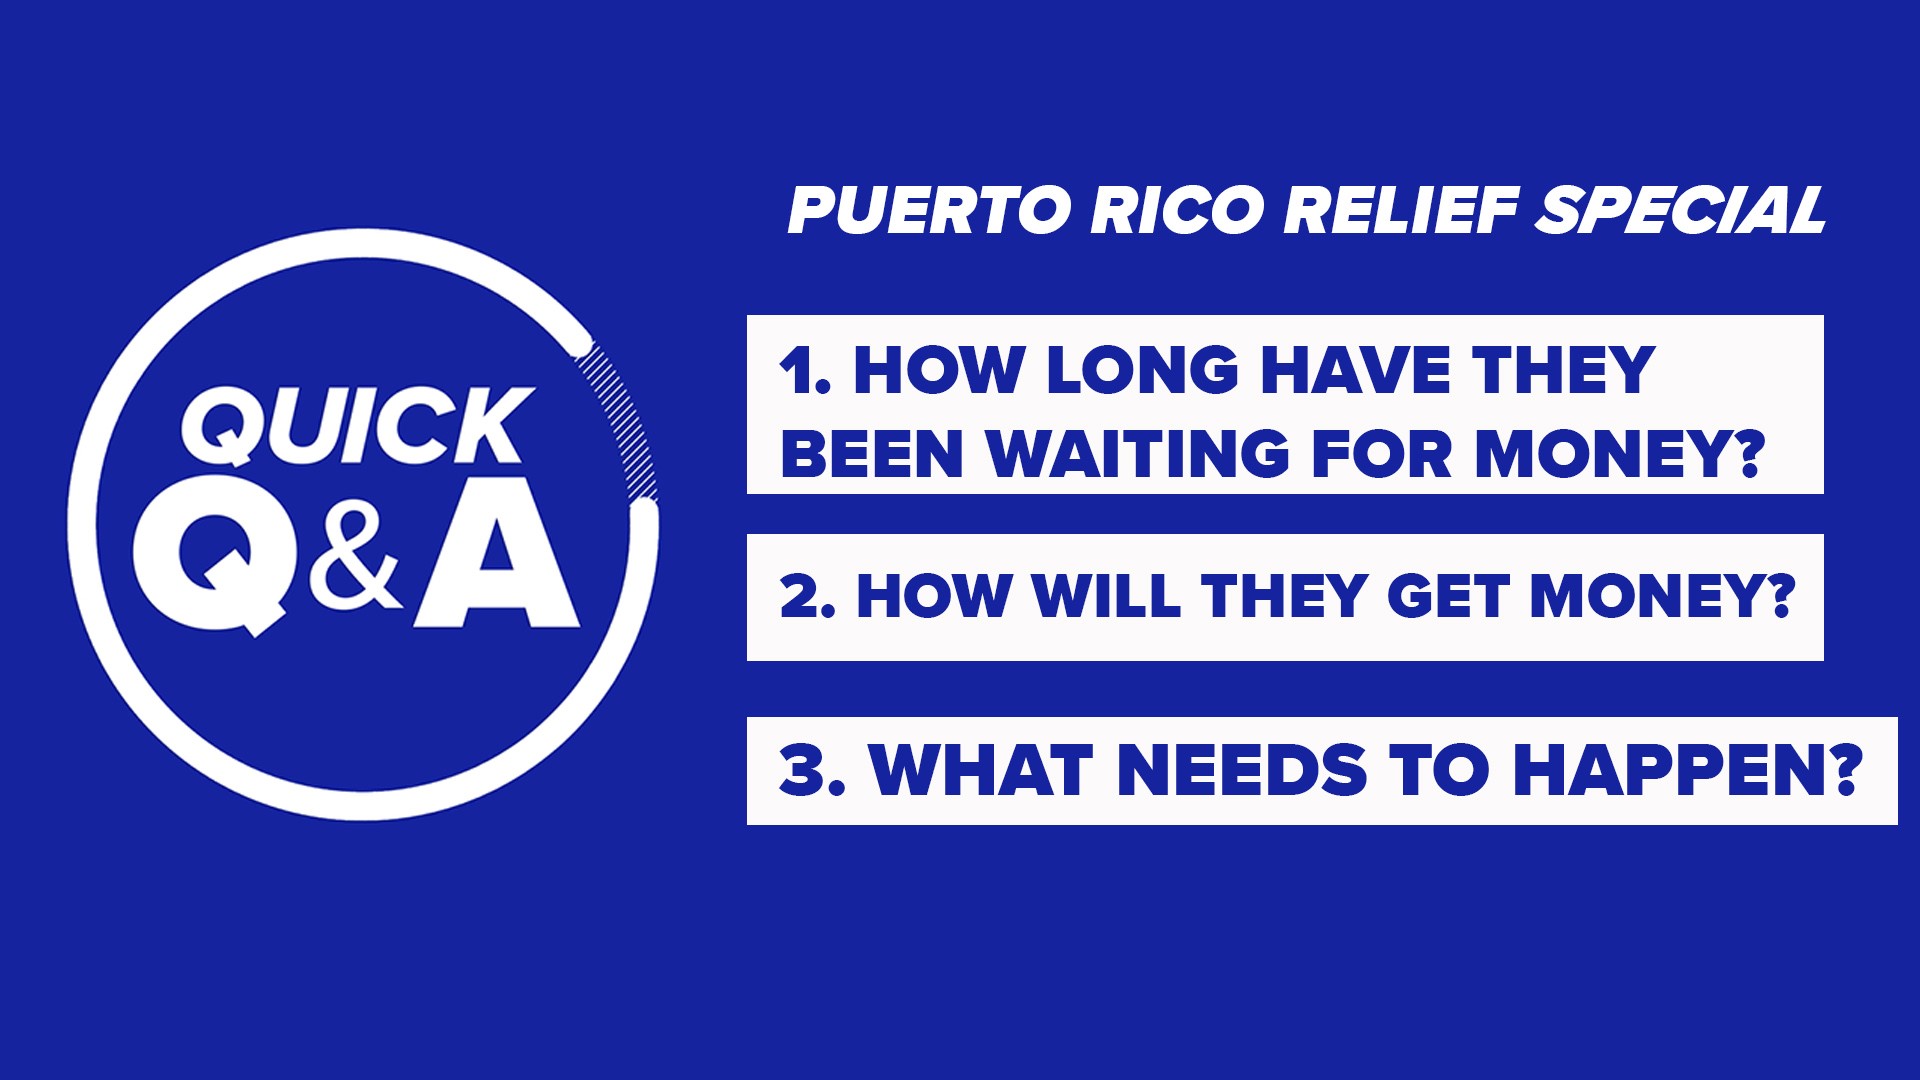 A special Quick Questions dedicated to answering questions about what happened to the relief funds owed to the citizens of Puerto Rico after the disasters